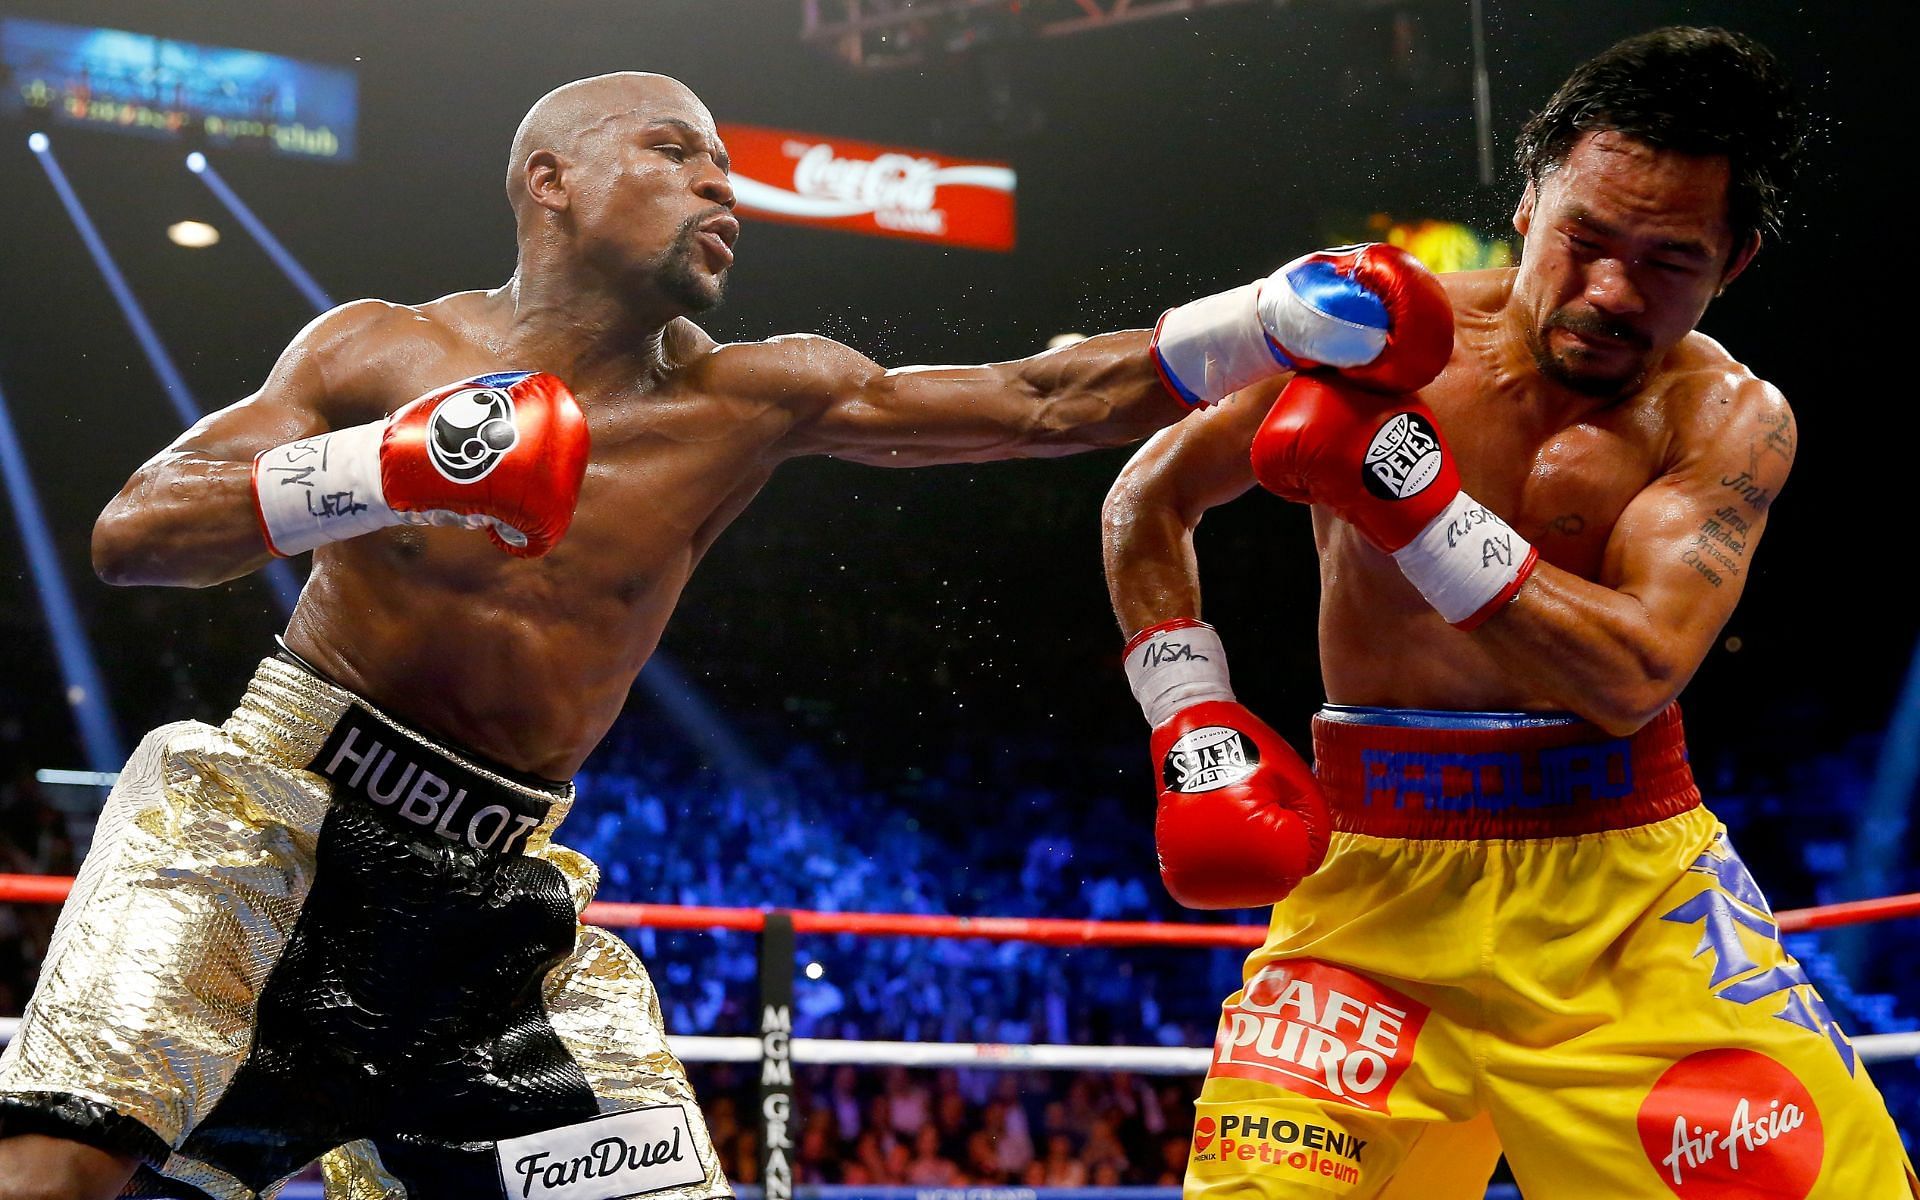 The iconic boxing match between Floyd 